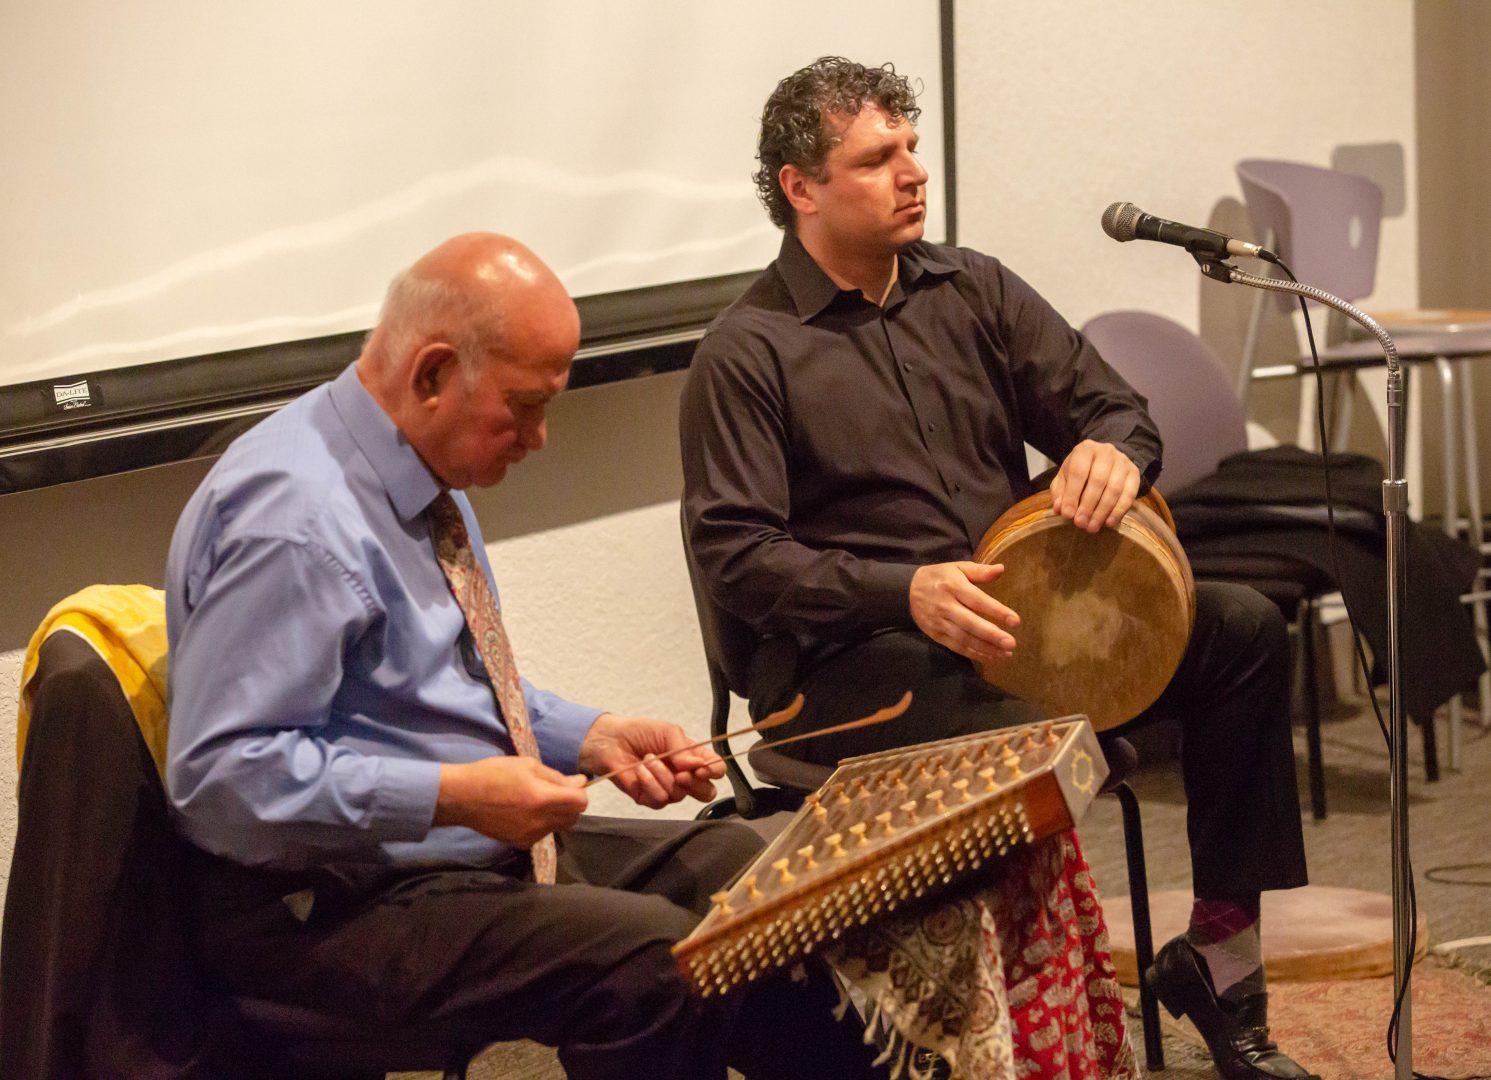 The Middle East studies lecture, performance and film series as well as Global Music Series
presented An Evening of Iranian Classical Music with Behrouz Sadeghian, left, playing the santur
and Faramarz Amiri, right, playing the zarb at the Peters Business Building on Friday, March 8,
2019. (Jose Romo Jr./The Collegian).